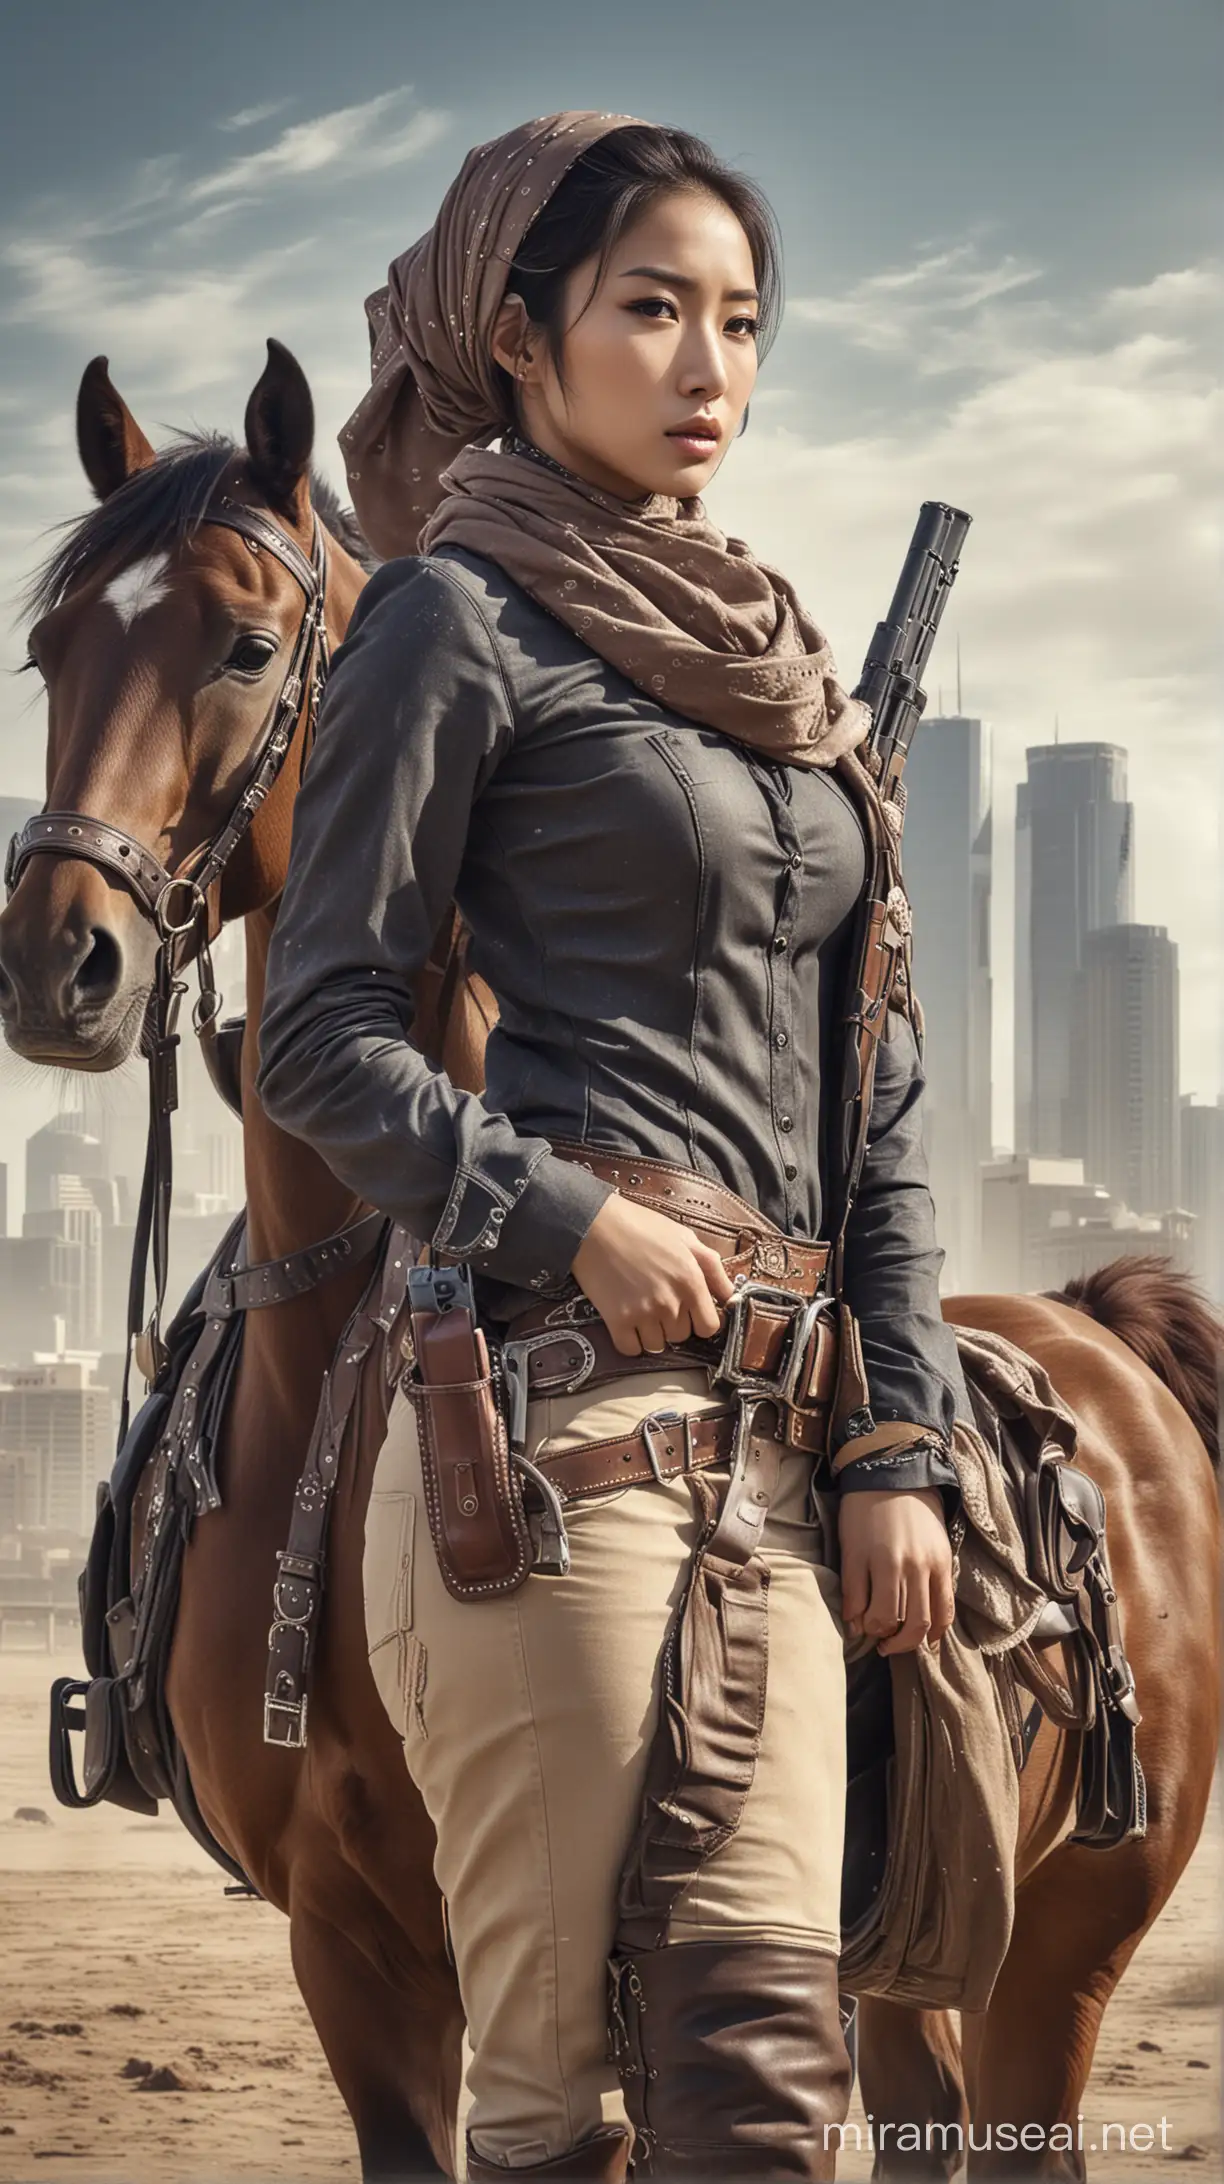 Korean Cowgirl with Shotguns Posing by Horse in Texas Cityscape